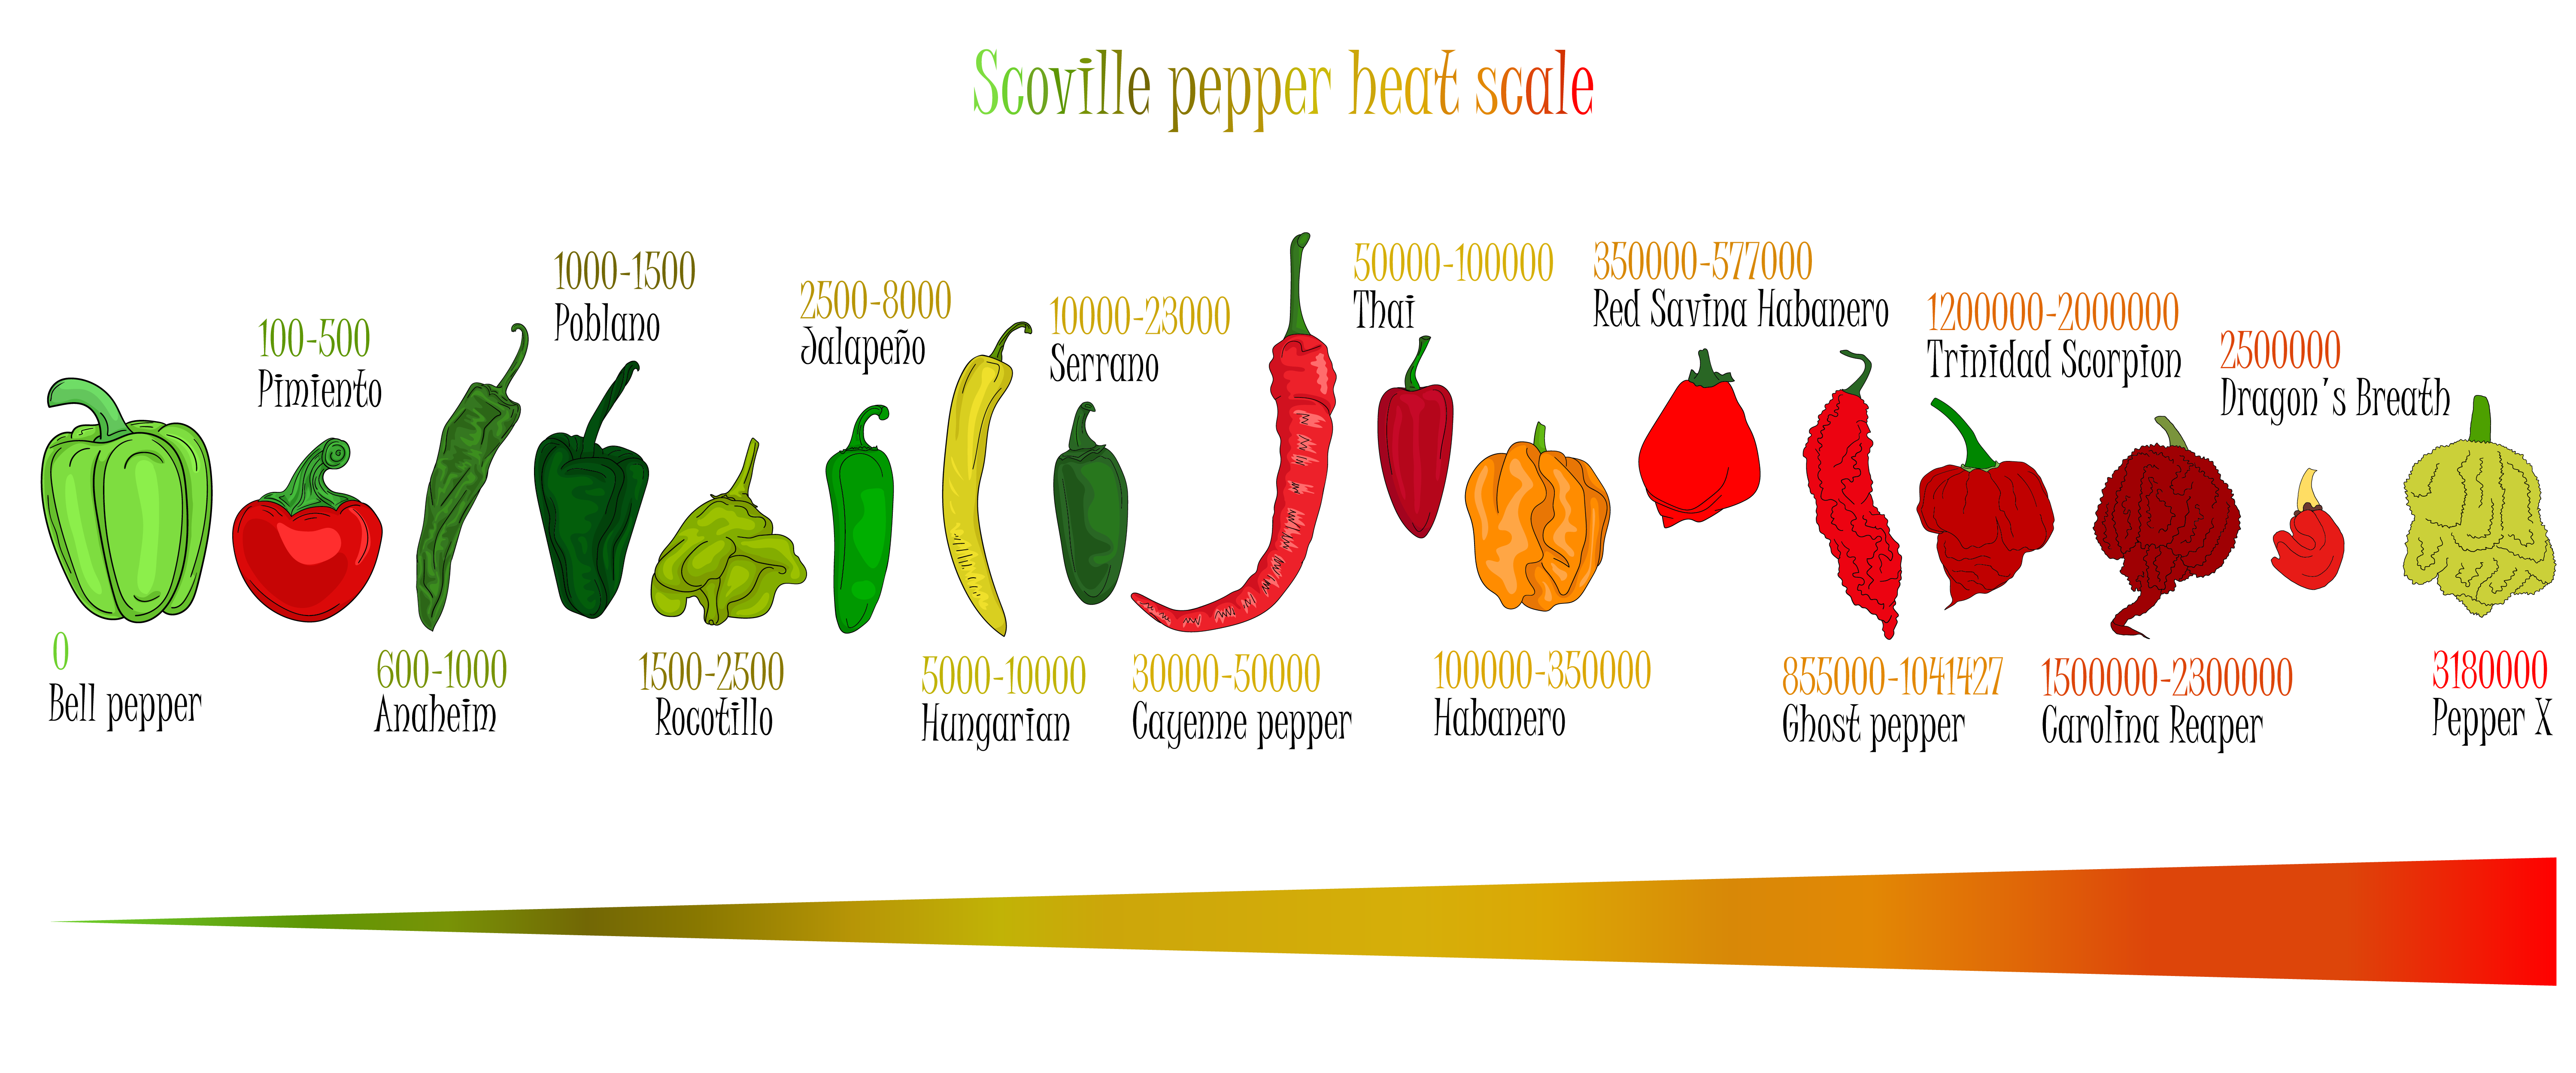 How Do You Measure the 'Heat' of a Pepper?